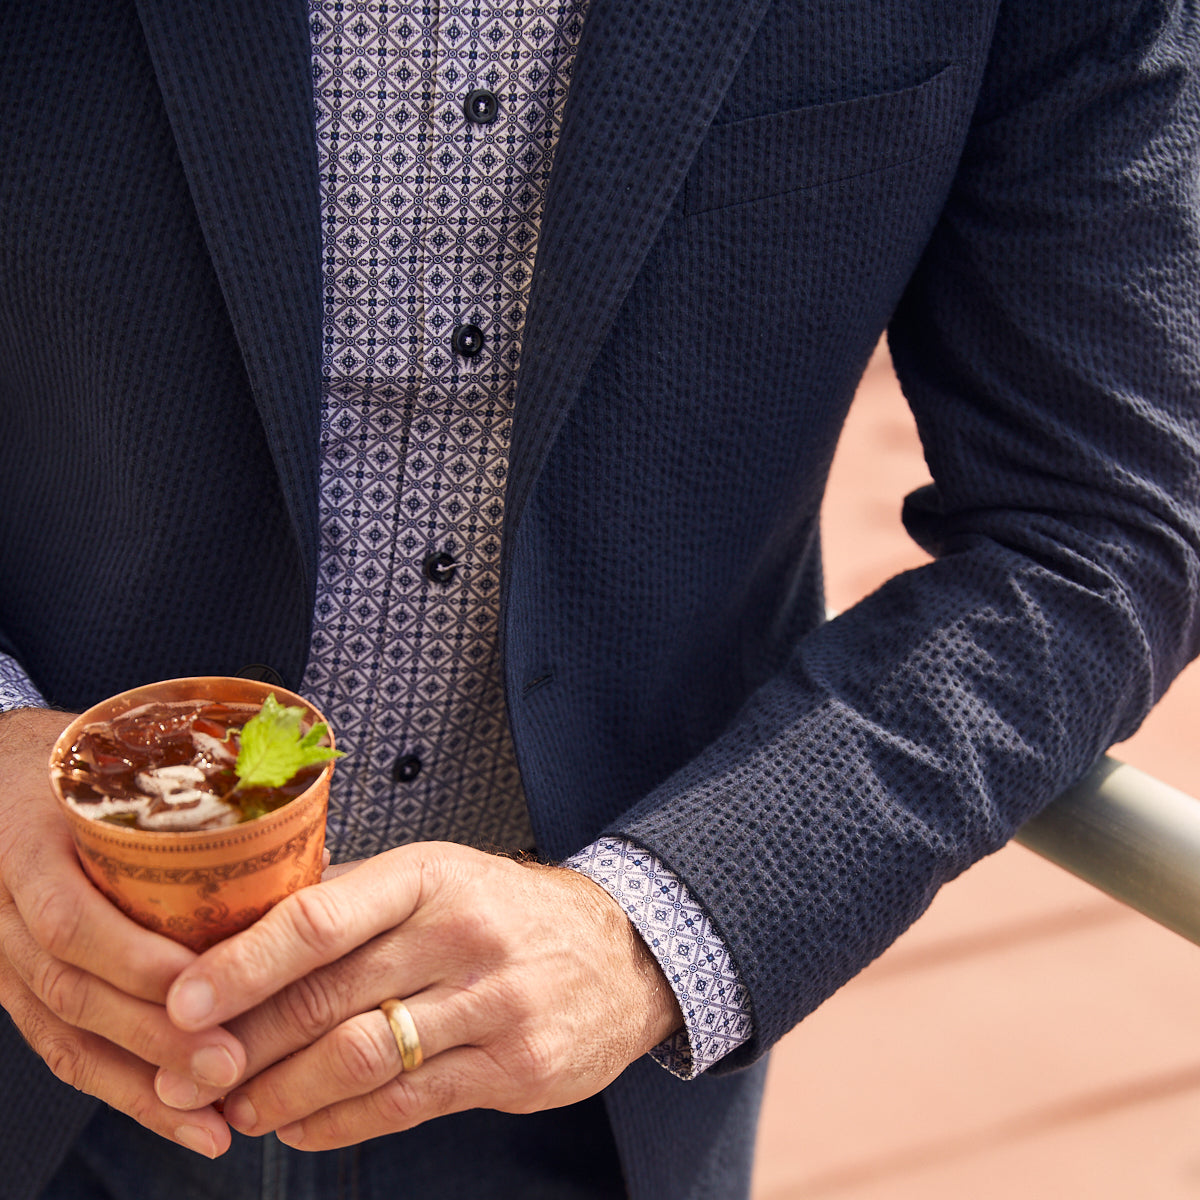 A nod to one of our favorite New Orleans cocktails, spiced with the warmth of cognac. Navy spiced up with the worlds best seersucker pucker. Always cool.   97% Cotton / 3% Lycra Haspel Exclusive Seersucker Stretch Fabric  •  Maximized Seersucker Pucker  •  Audubon Classic Fit  •  Natural Shoulder  •  Two Buttons  •  Flap Pockets  •  3/4 Lined for Maximum Cool  •  Side Vents  •  Notch Lapel  •  Dry Clean  •  Made in USA